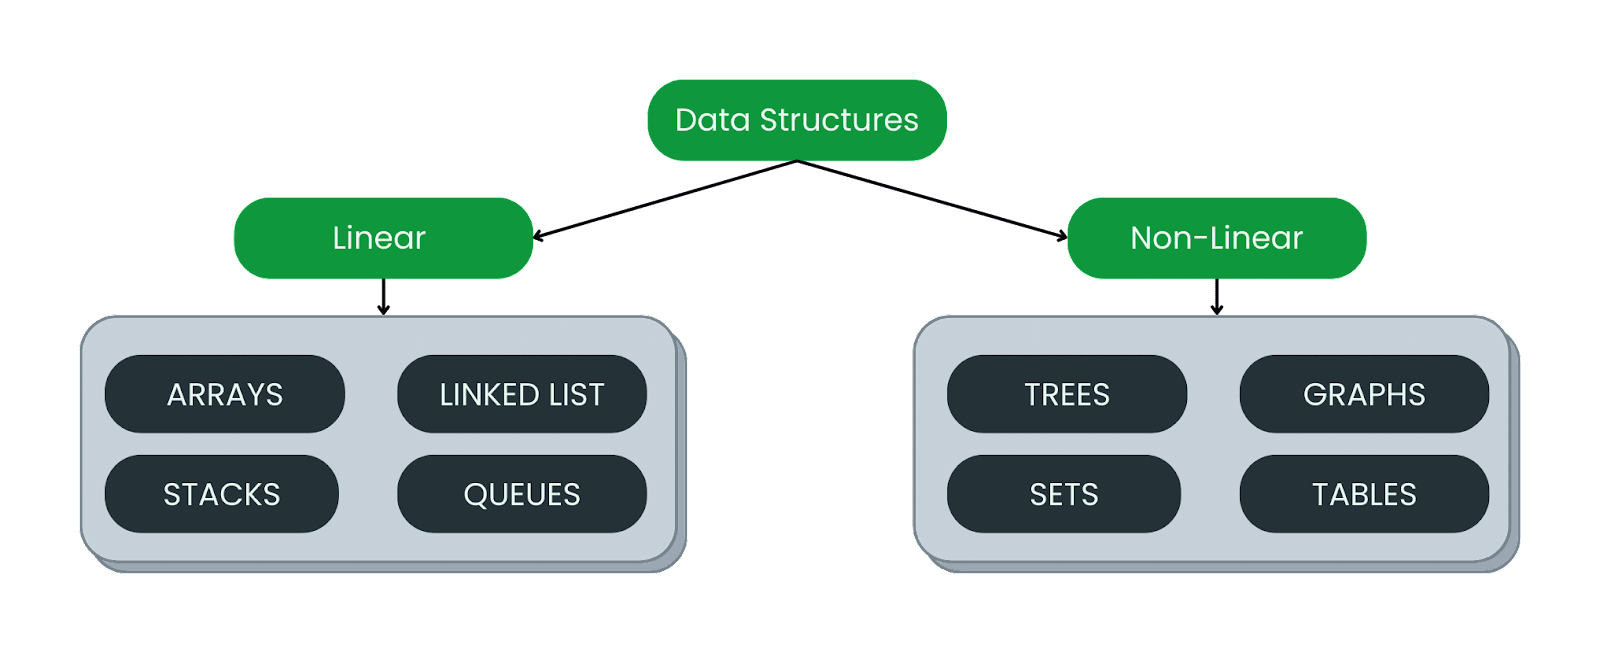 linear and non-linear data structure